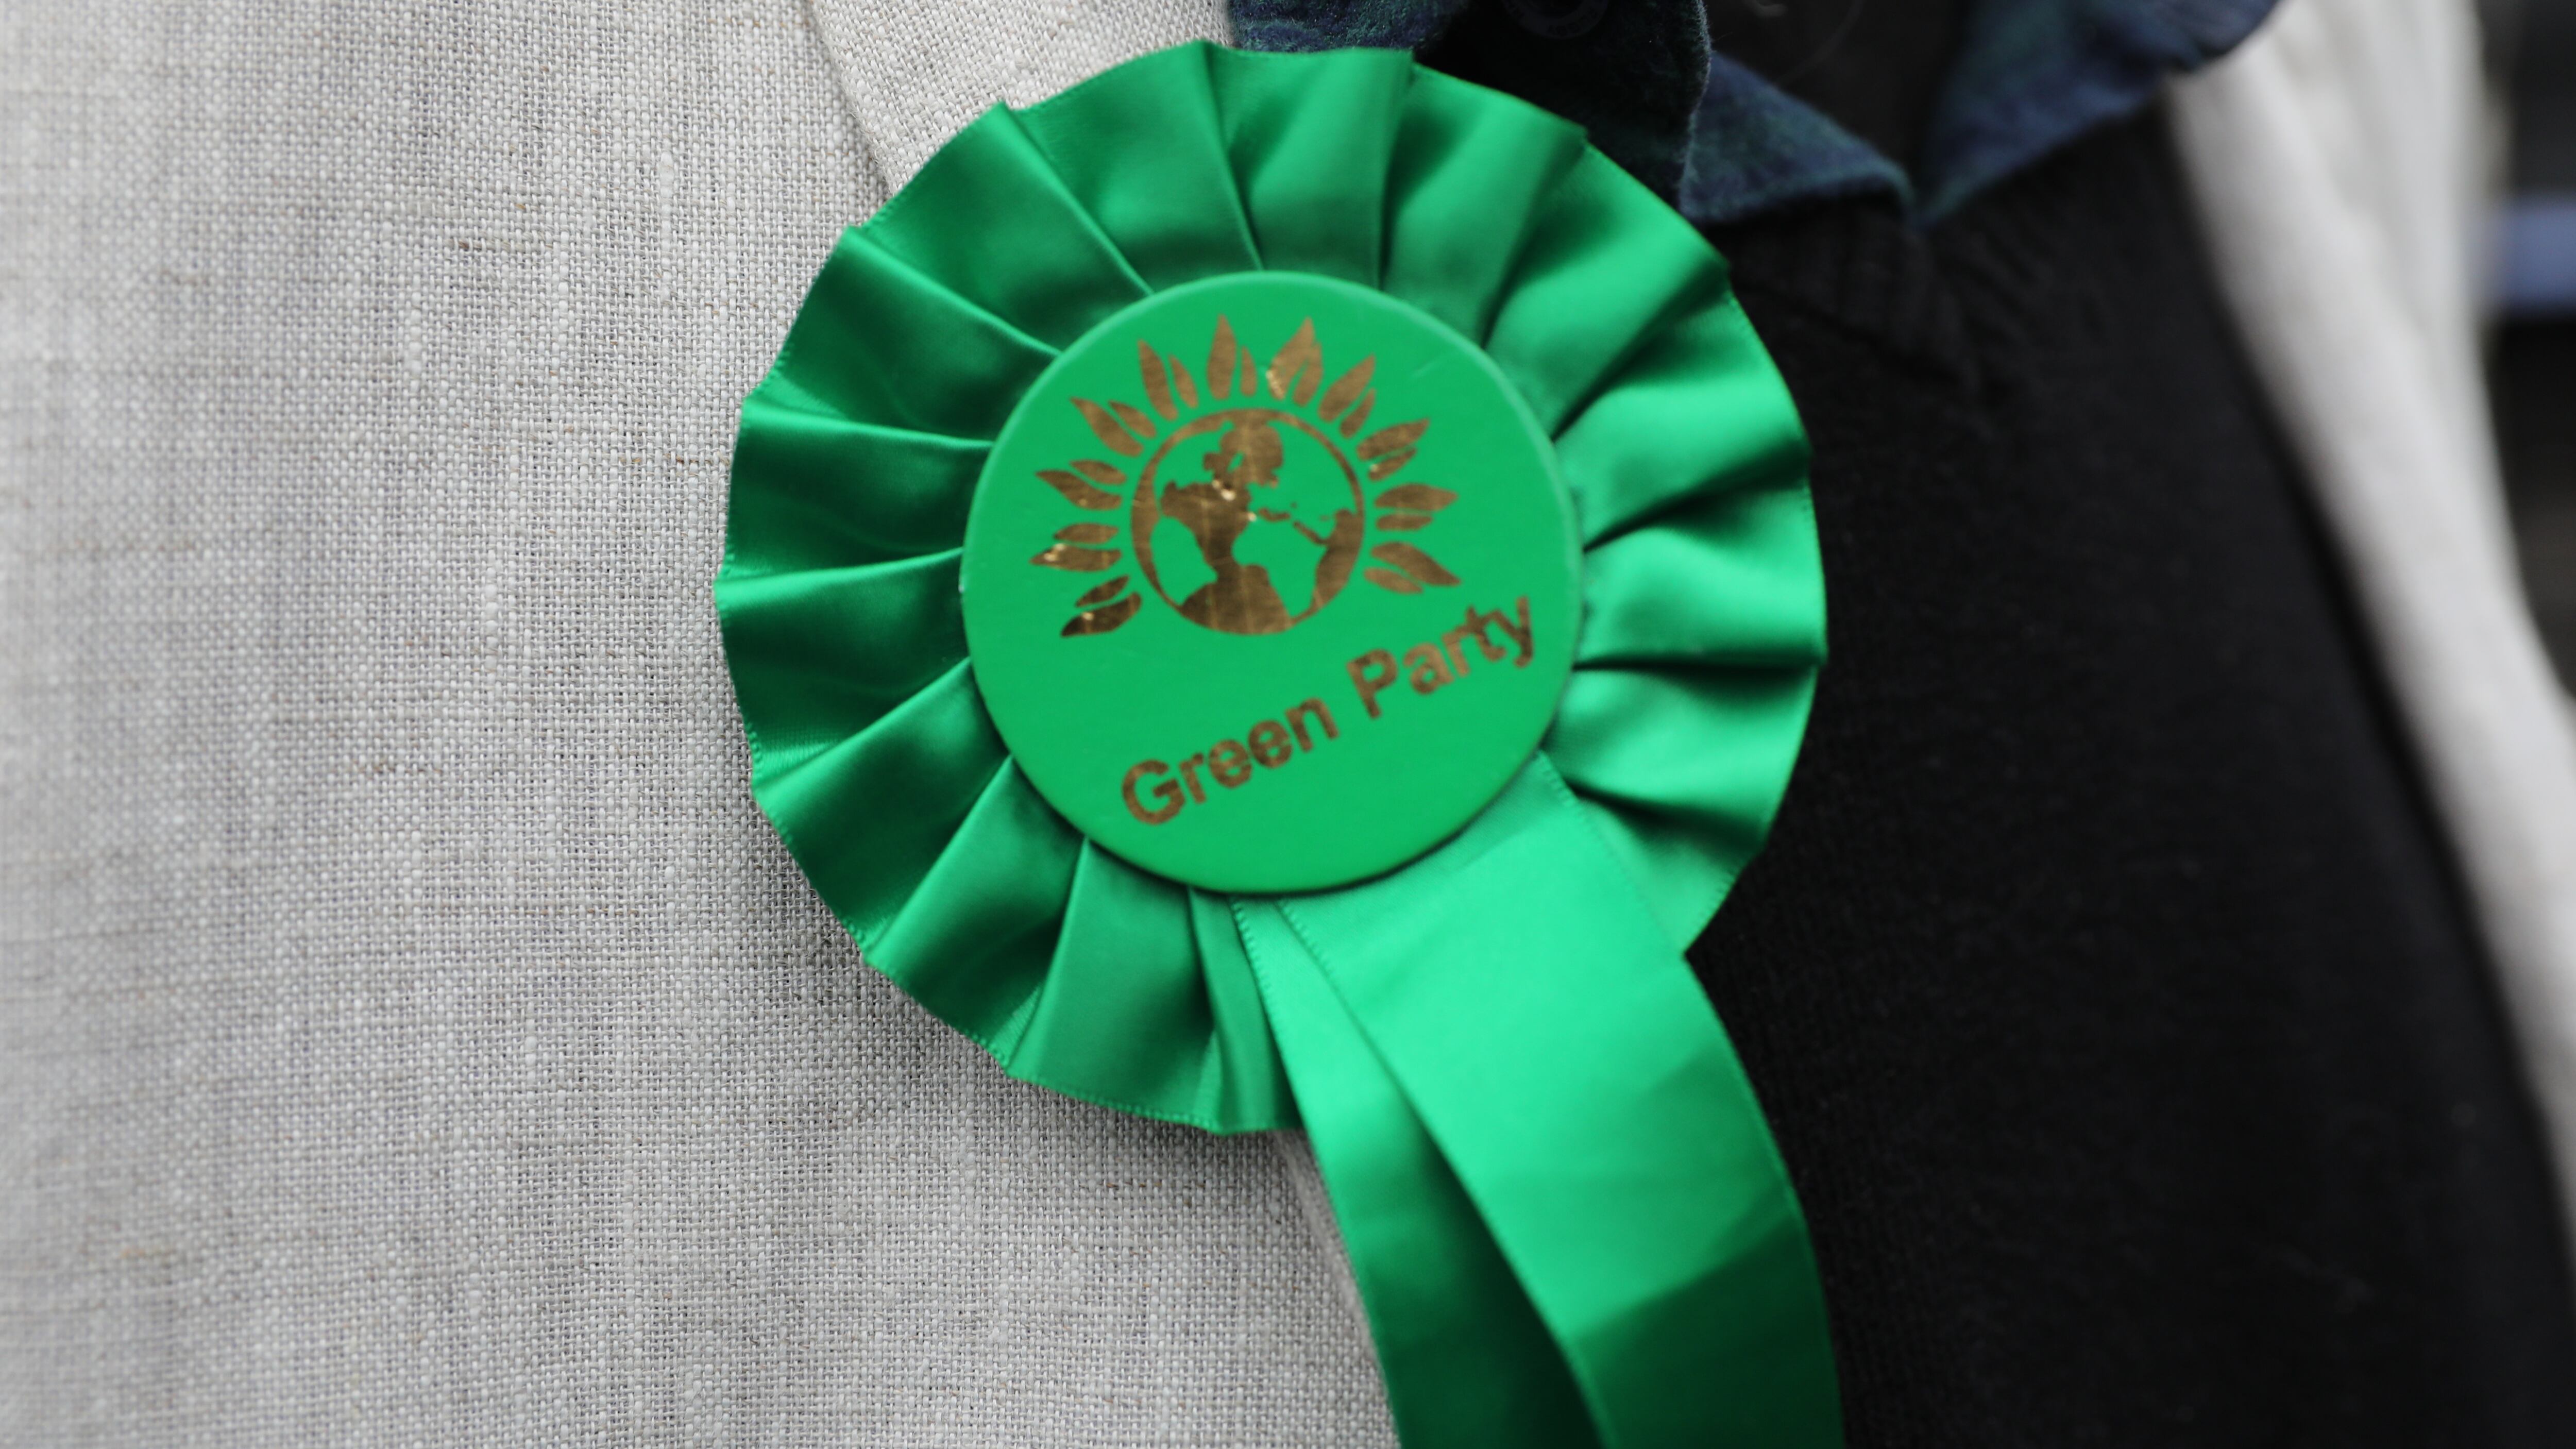 The Green Party has confirmed it will conduct a full review of its health policy